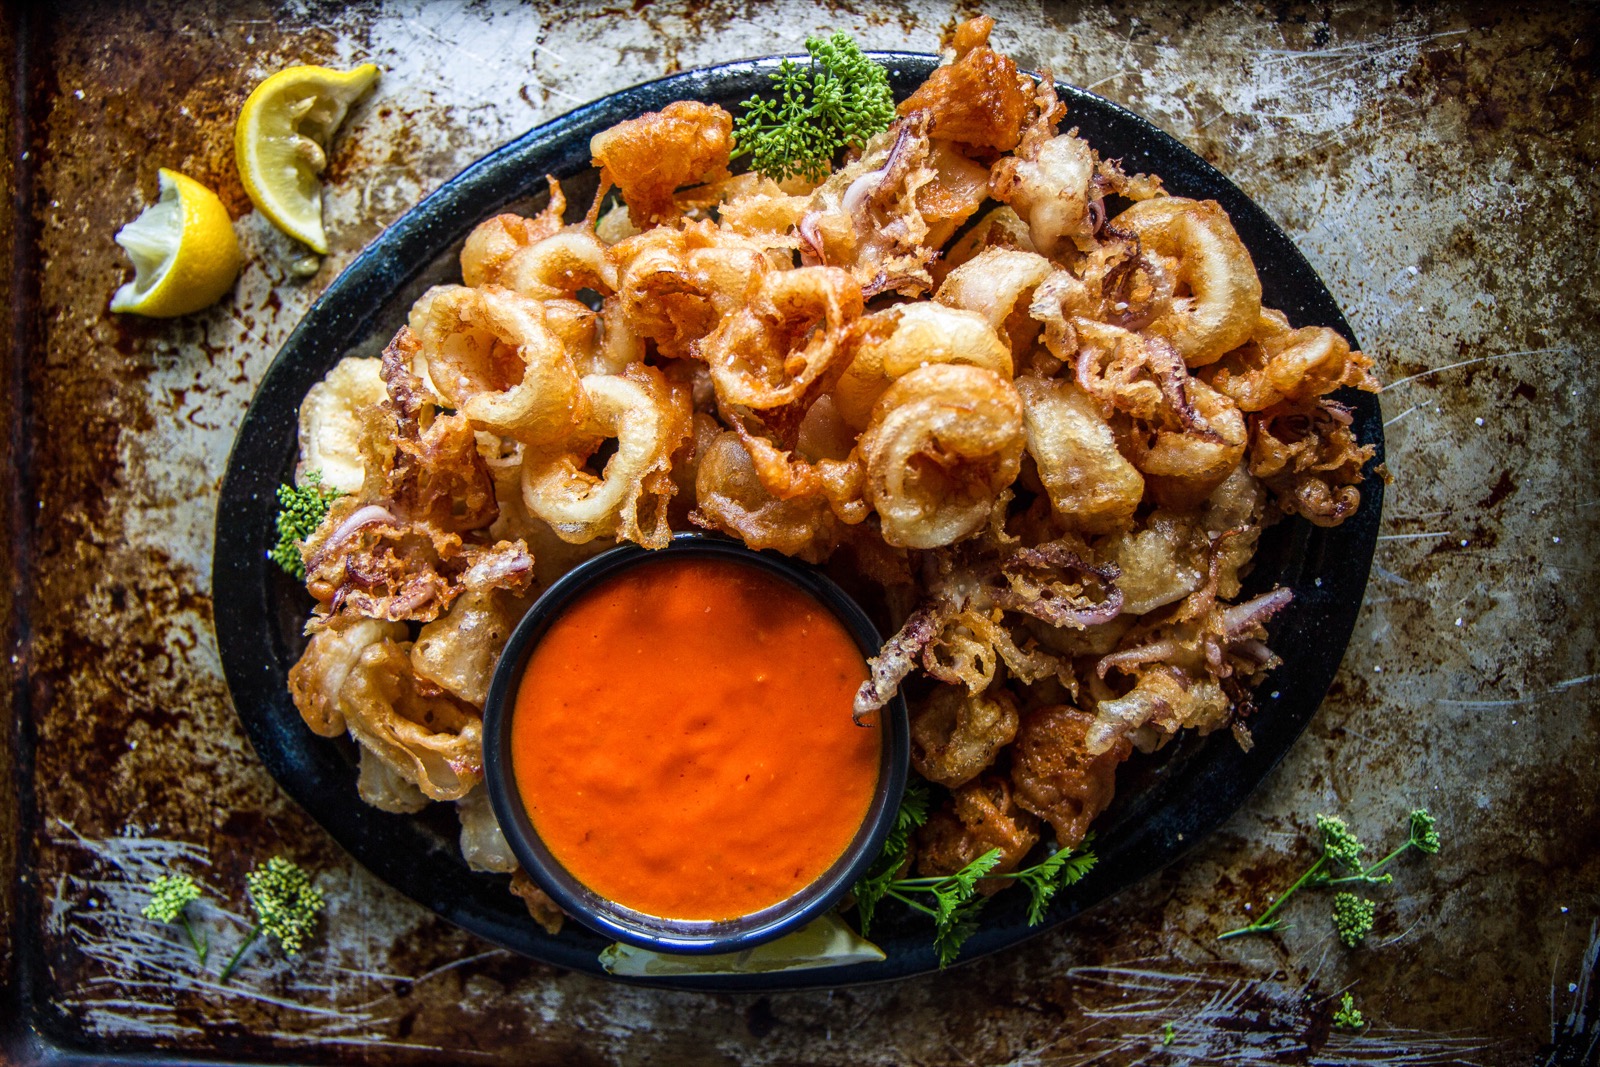 🍤 Can We Guess Your Age and Gender Based on the Seafood Dishes You’ve Eaten? Fried Calamari